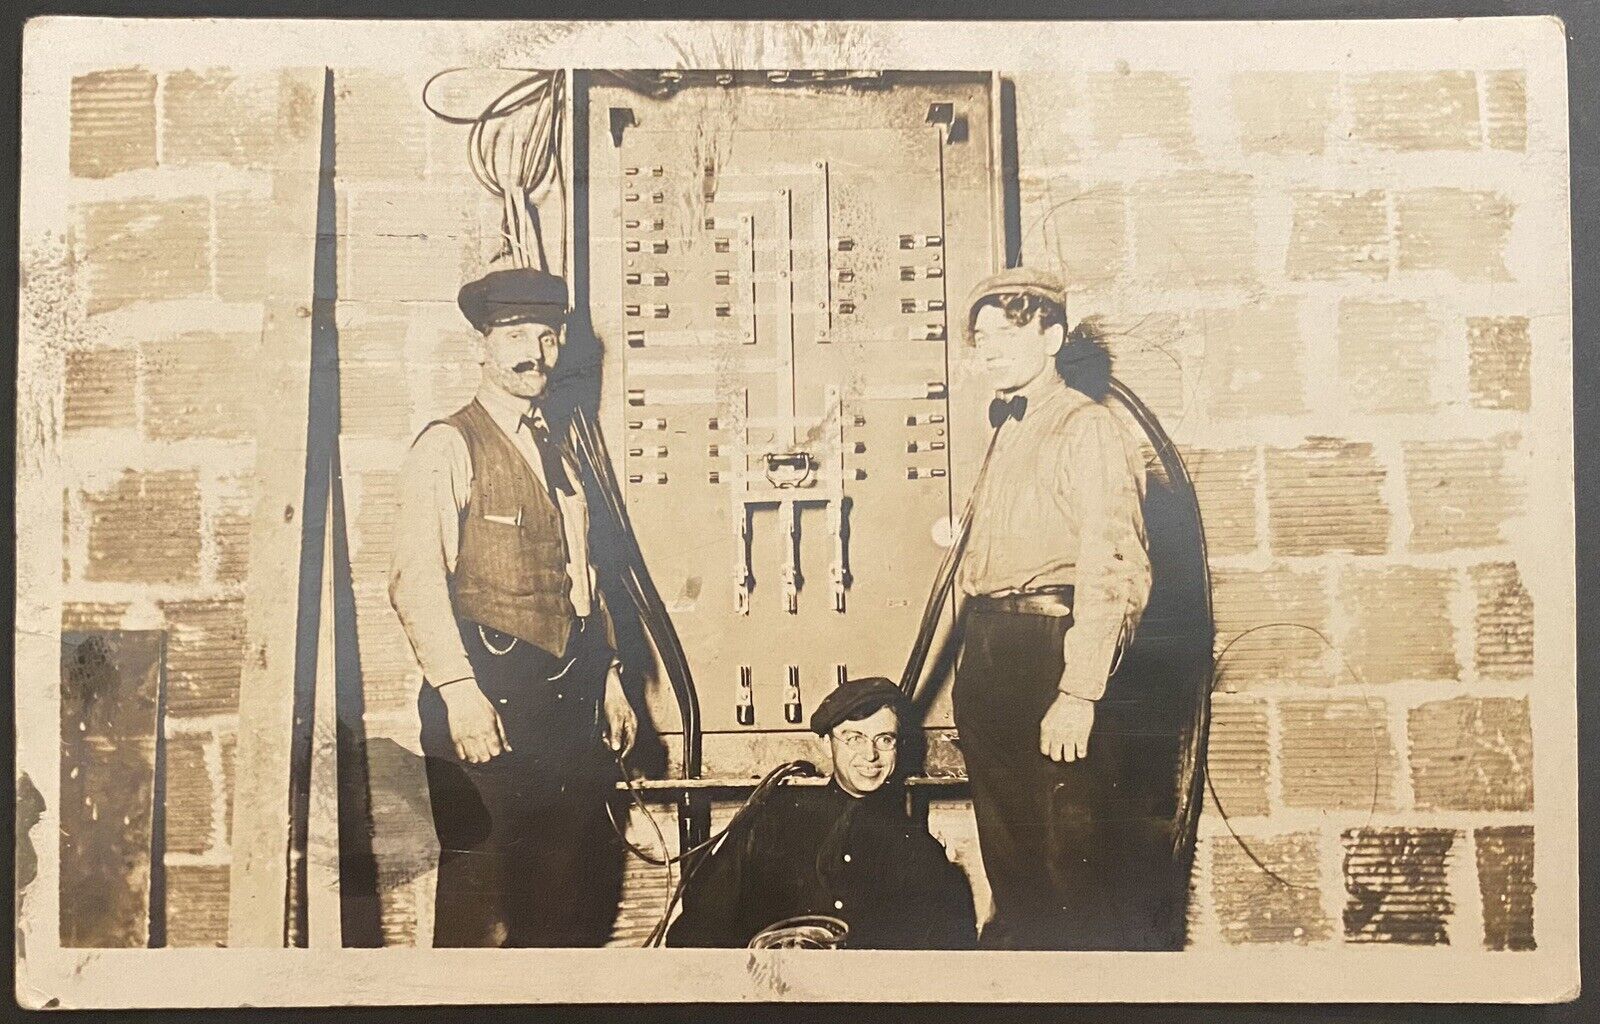 SUPERIOR WI RPPC REAL PHOTO POSTCARD-3 ELECTRICIANS~ELECTRICAL PANEL~OCCUPATION